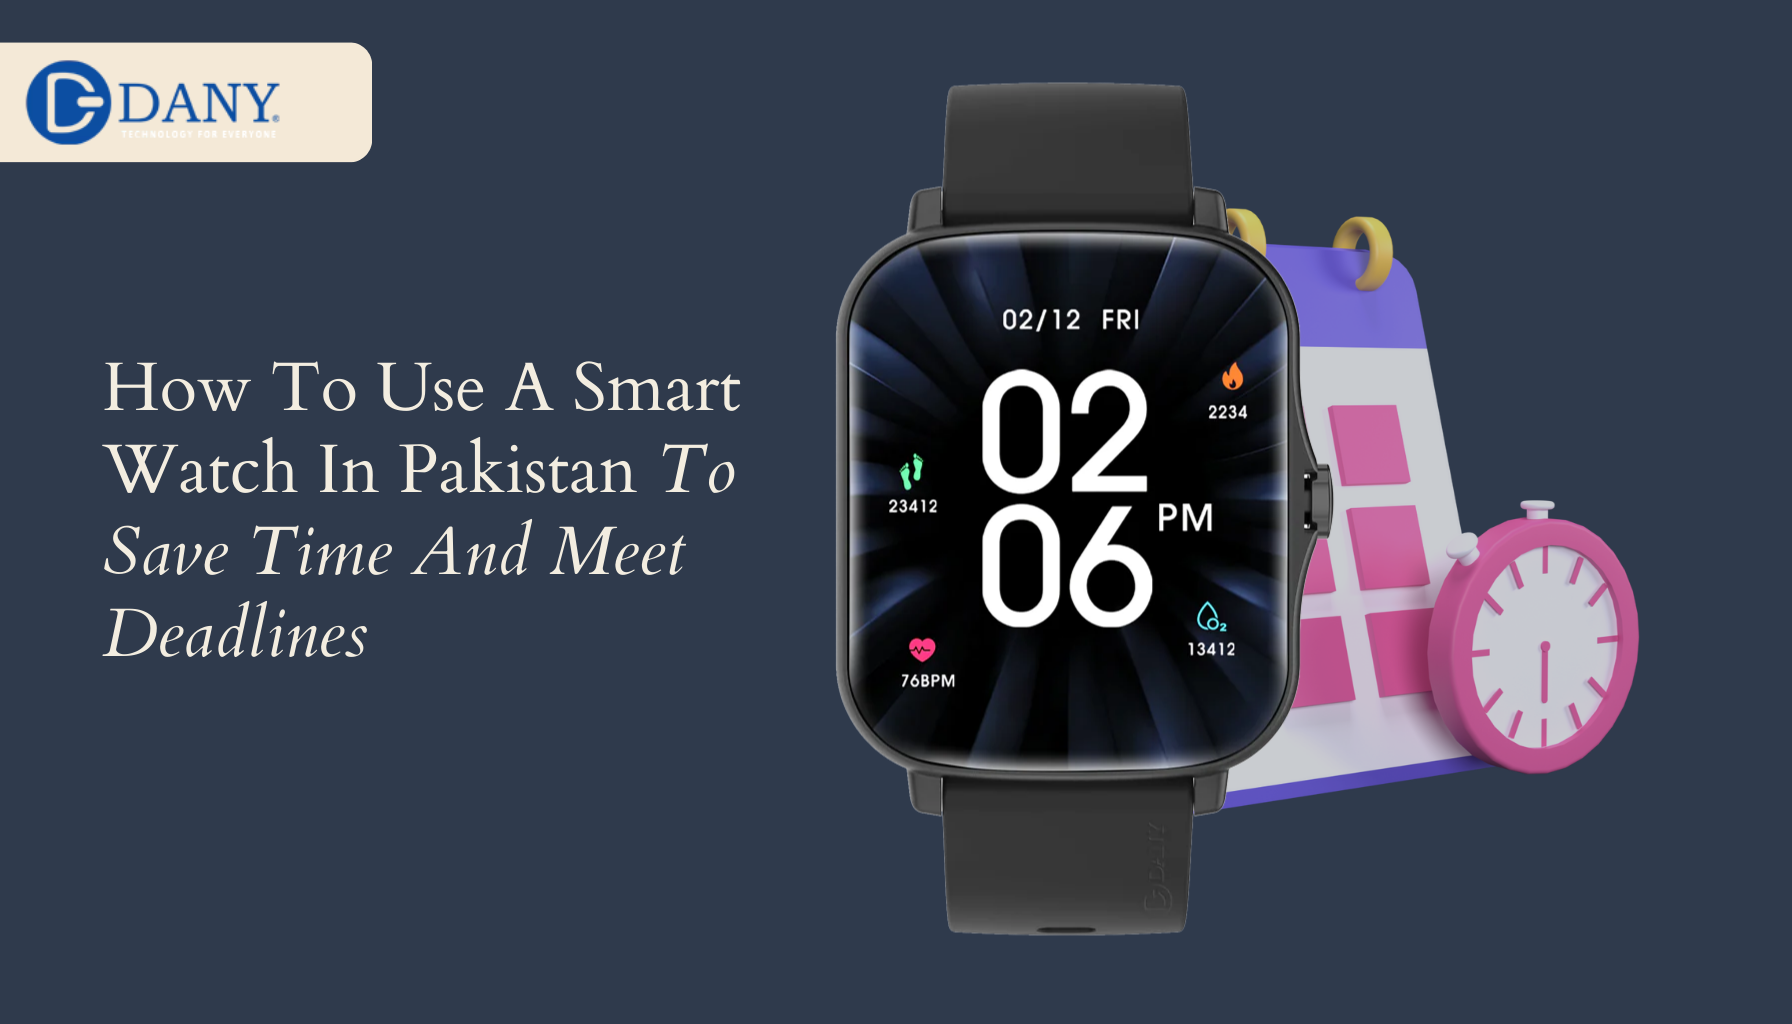 How To Use A Smart Watch In Pakistan To Save Time And Meet Deadlines